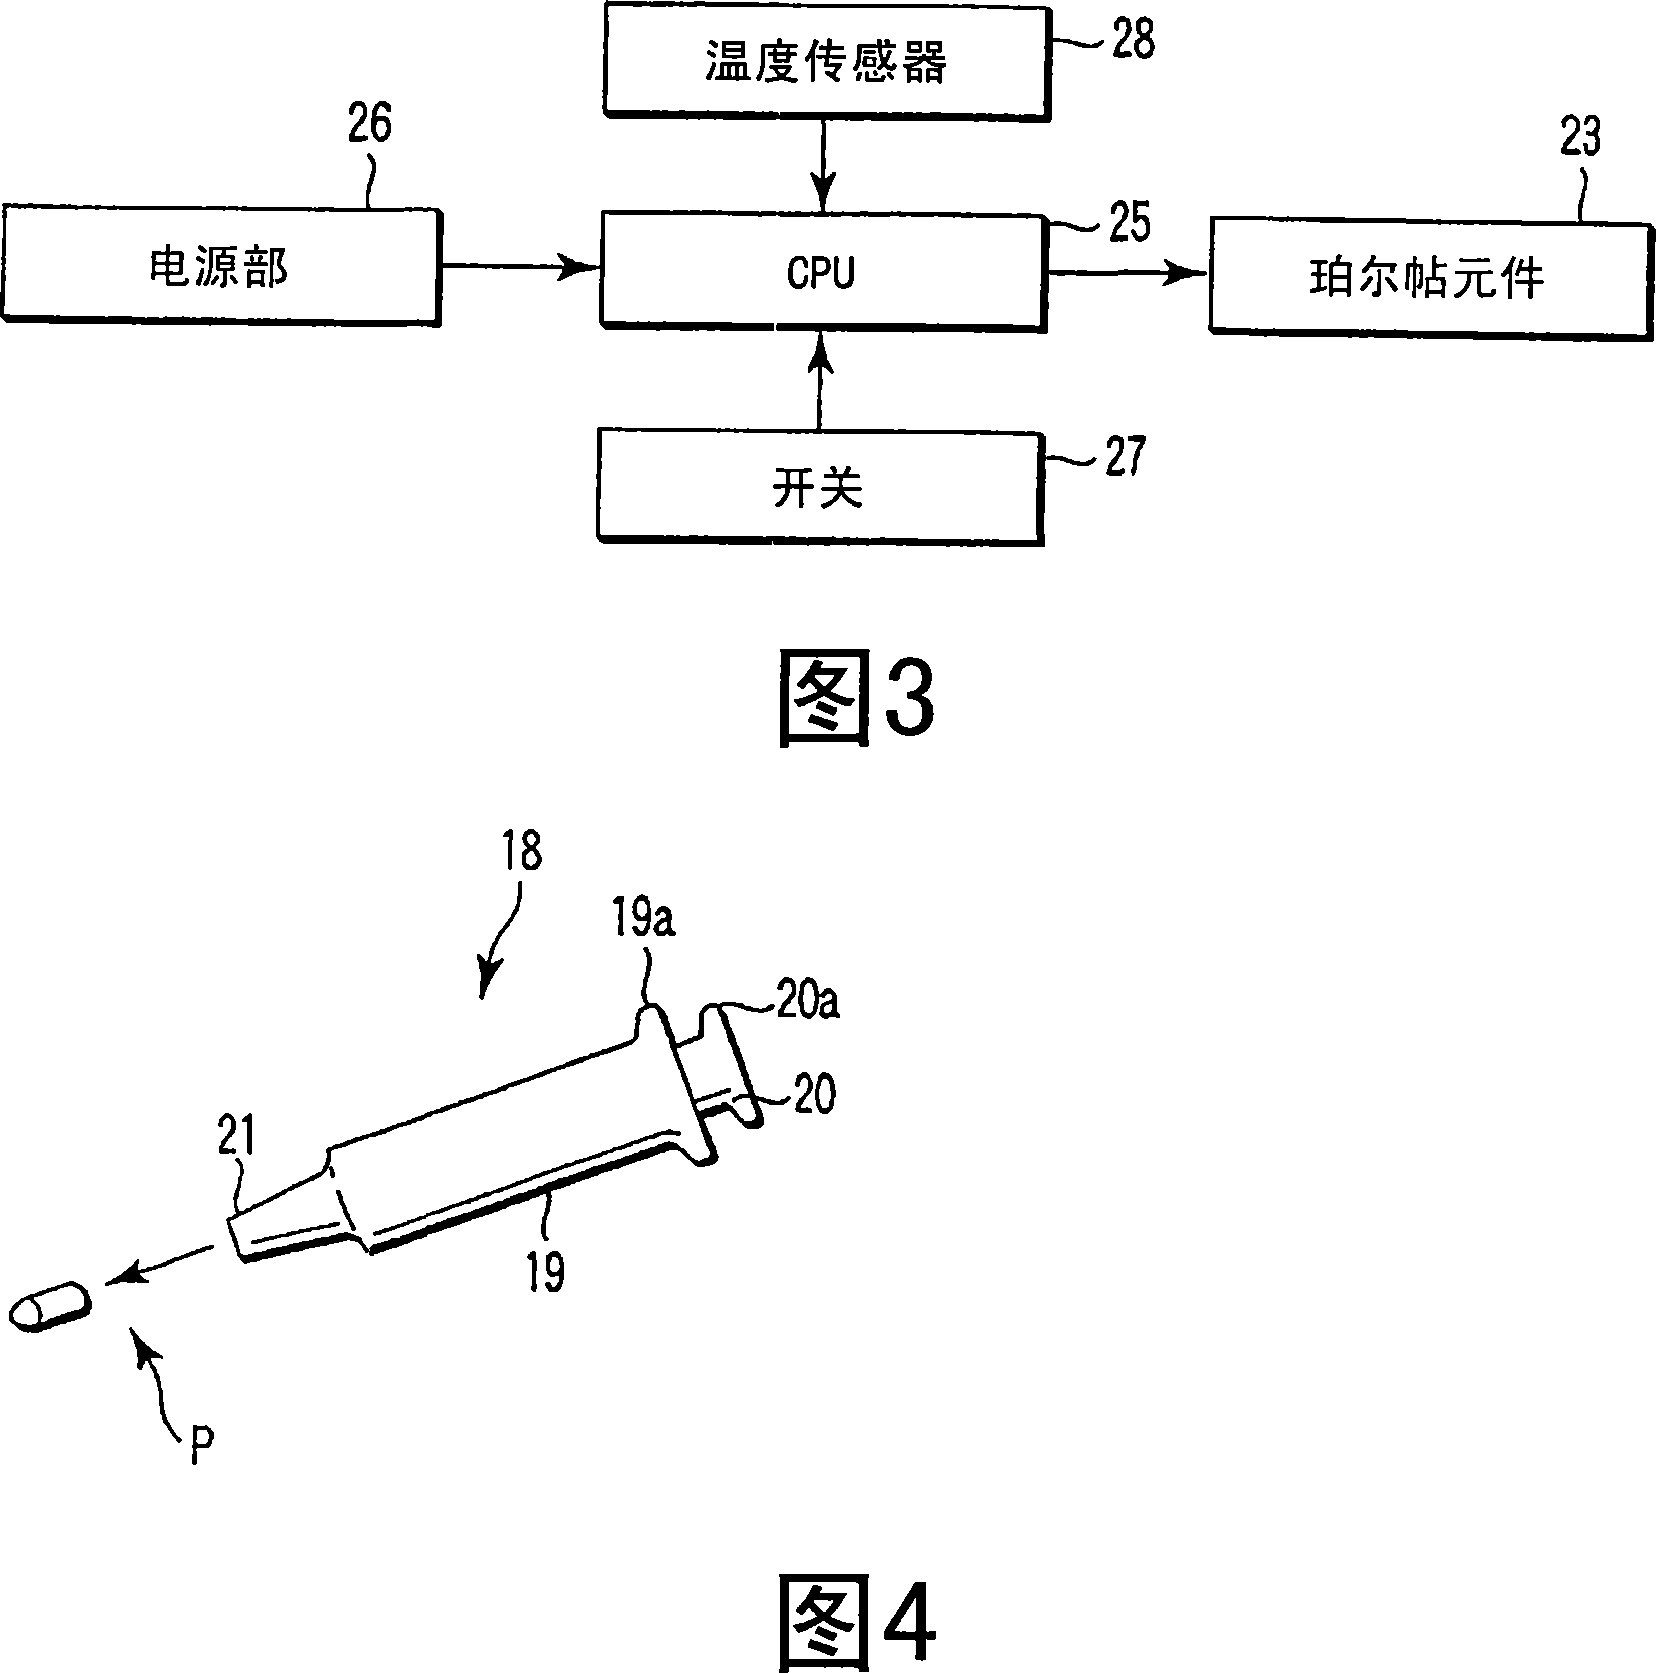 Endoscopic therapeutic device, living body tissue analyzing and processing system, and sample-taking method for tissue analysis process